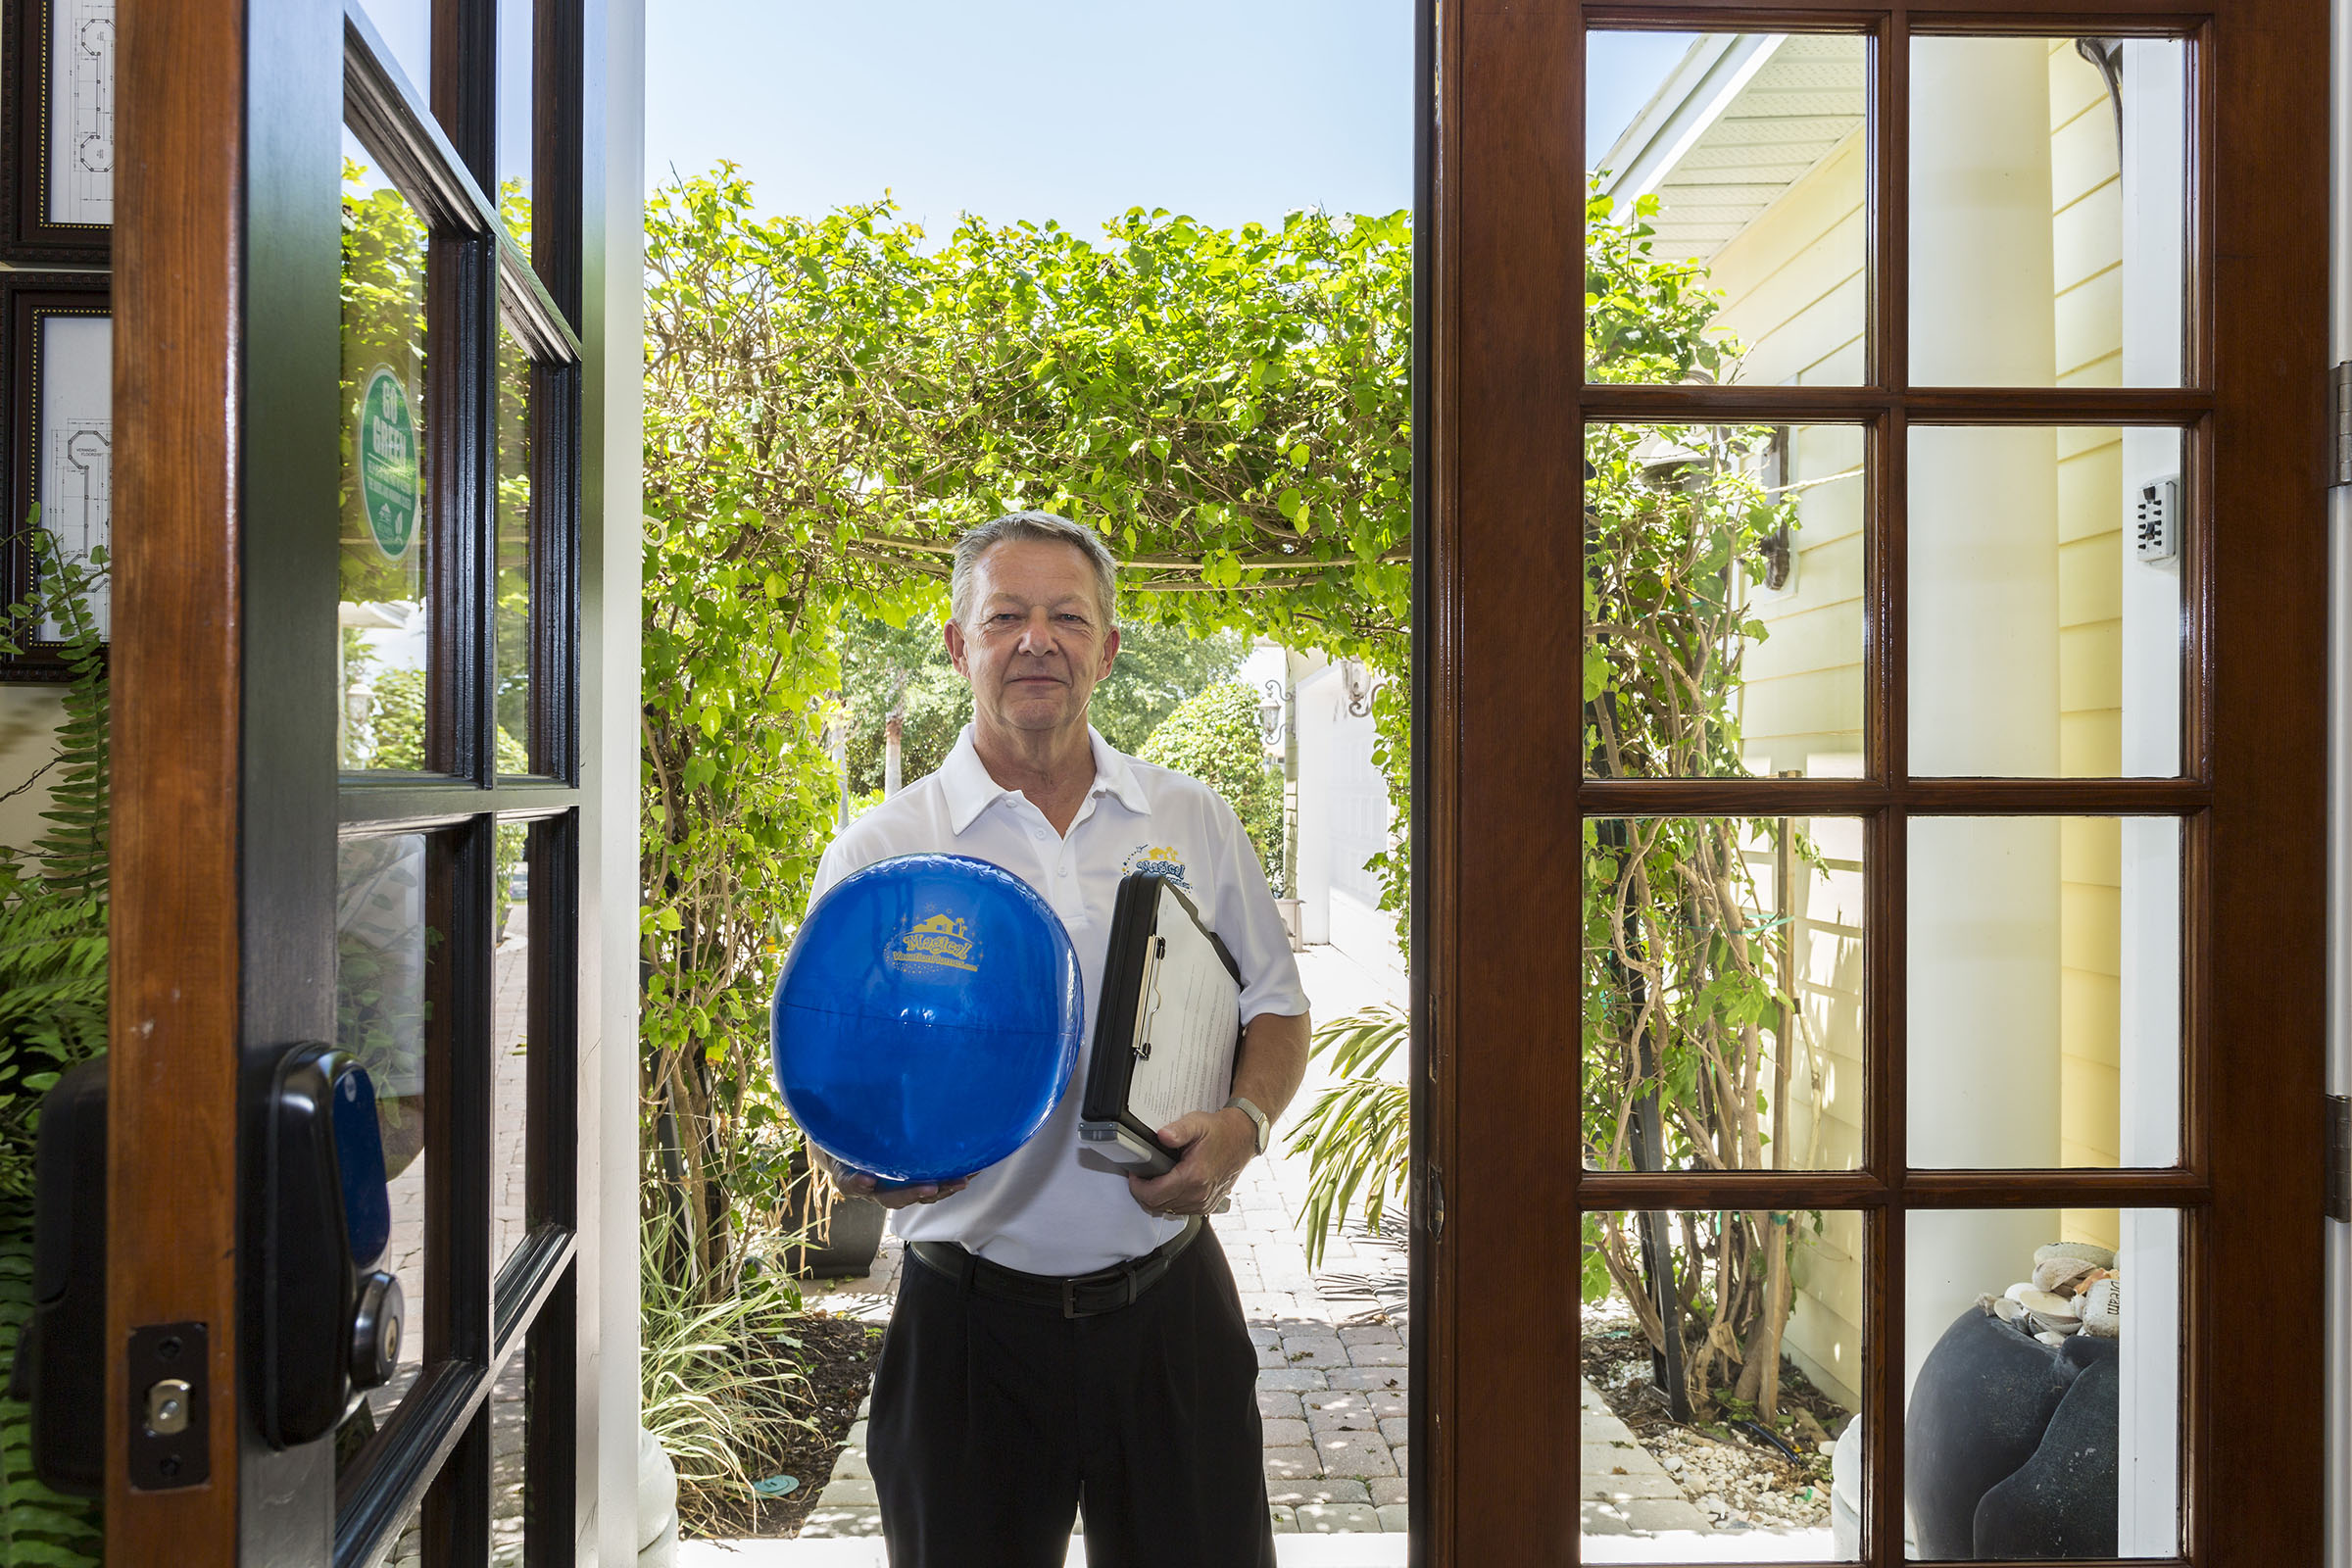 Older man standing at outside entrance of brown french doors holding a see-through royal blue beach ball with yellow writing of logo "Magical Vacation Homes". Archway made of vines. Daytime photo.